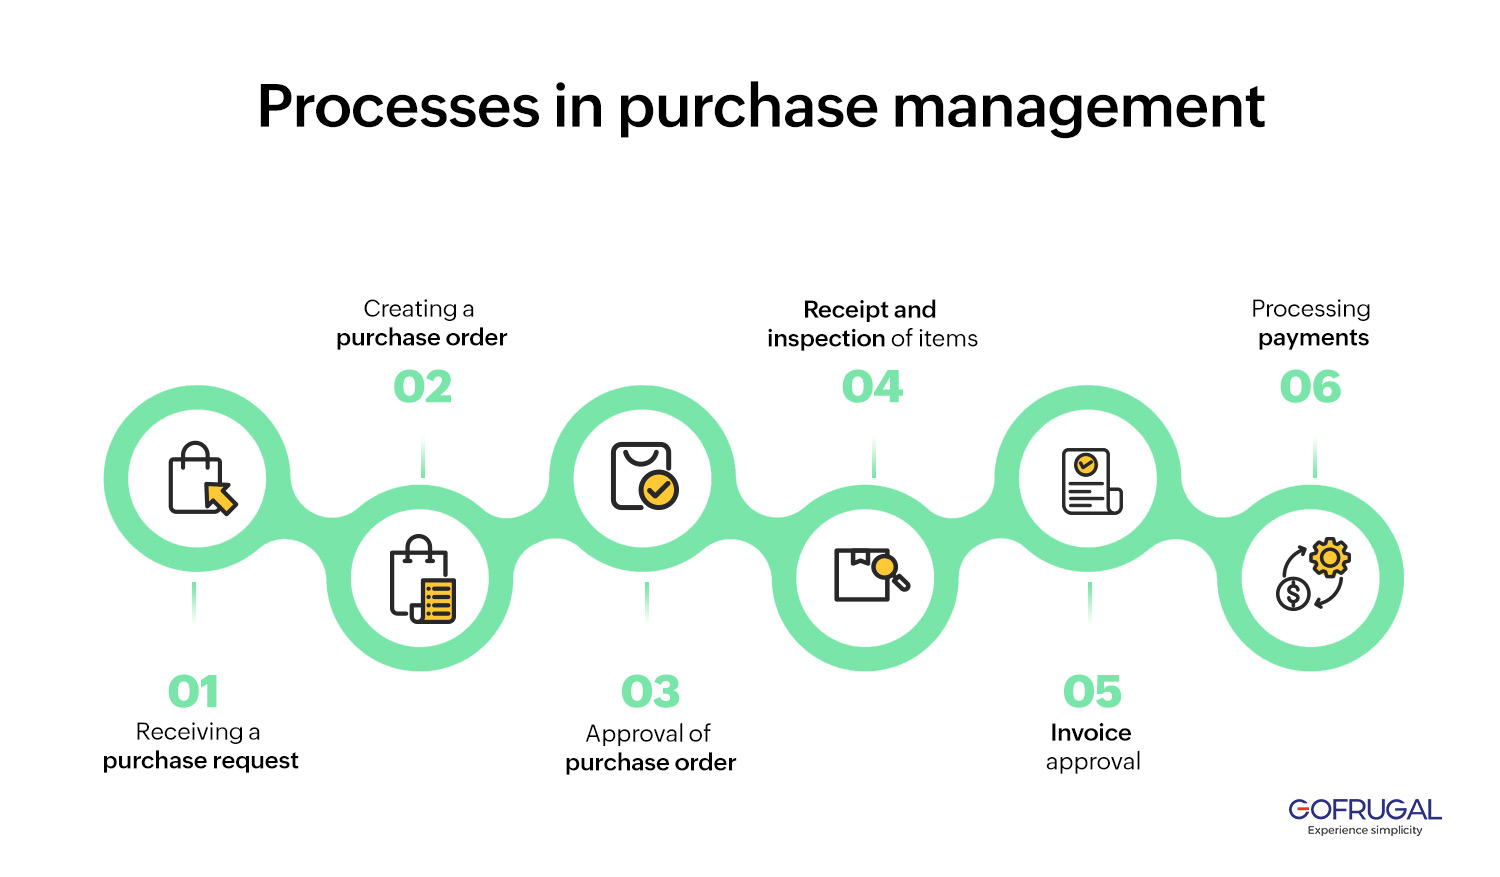 Processes in purchase management